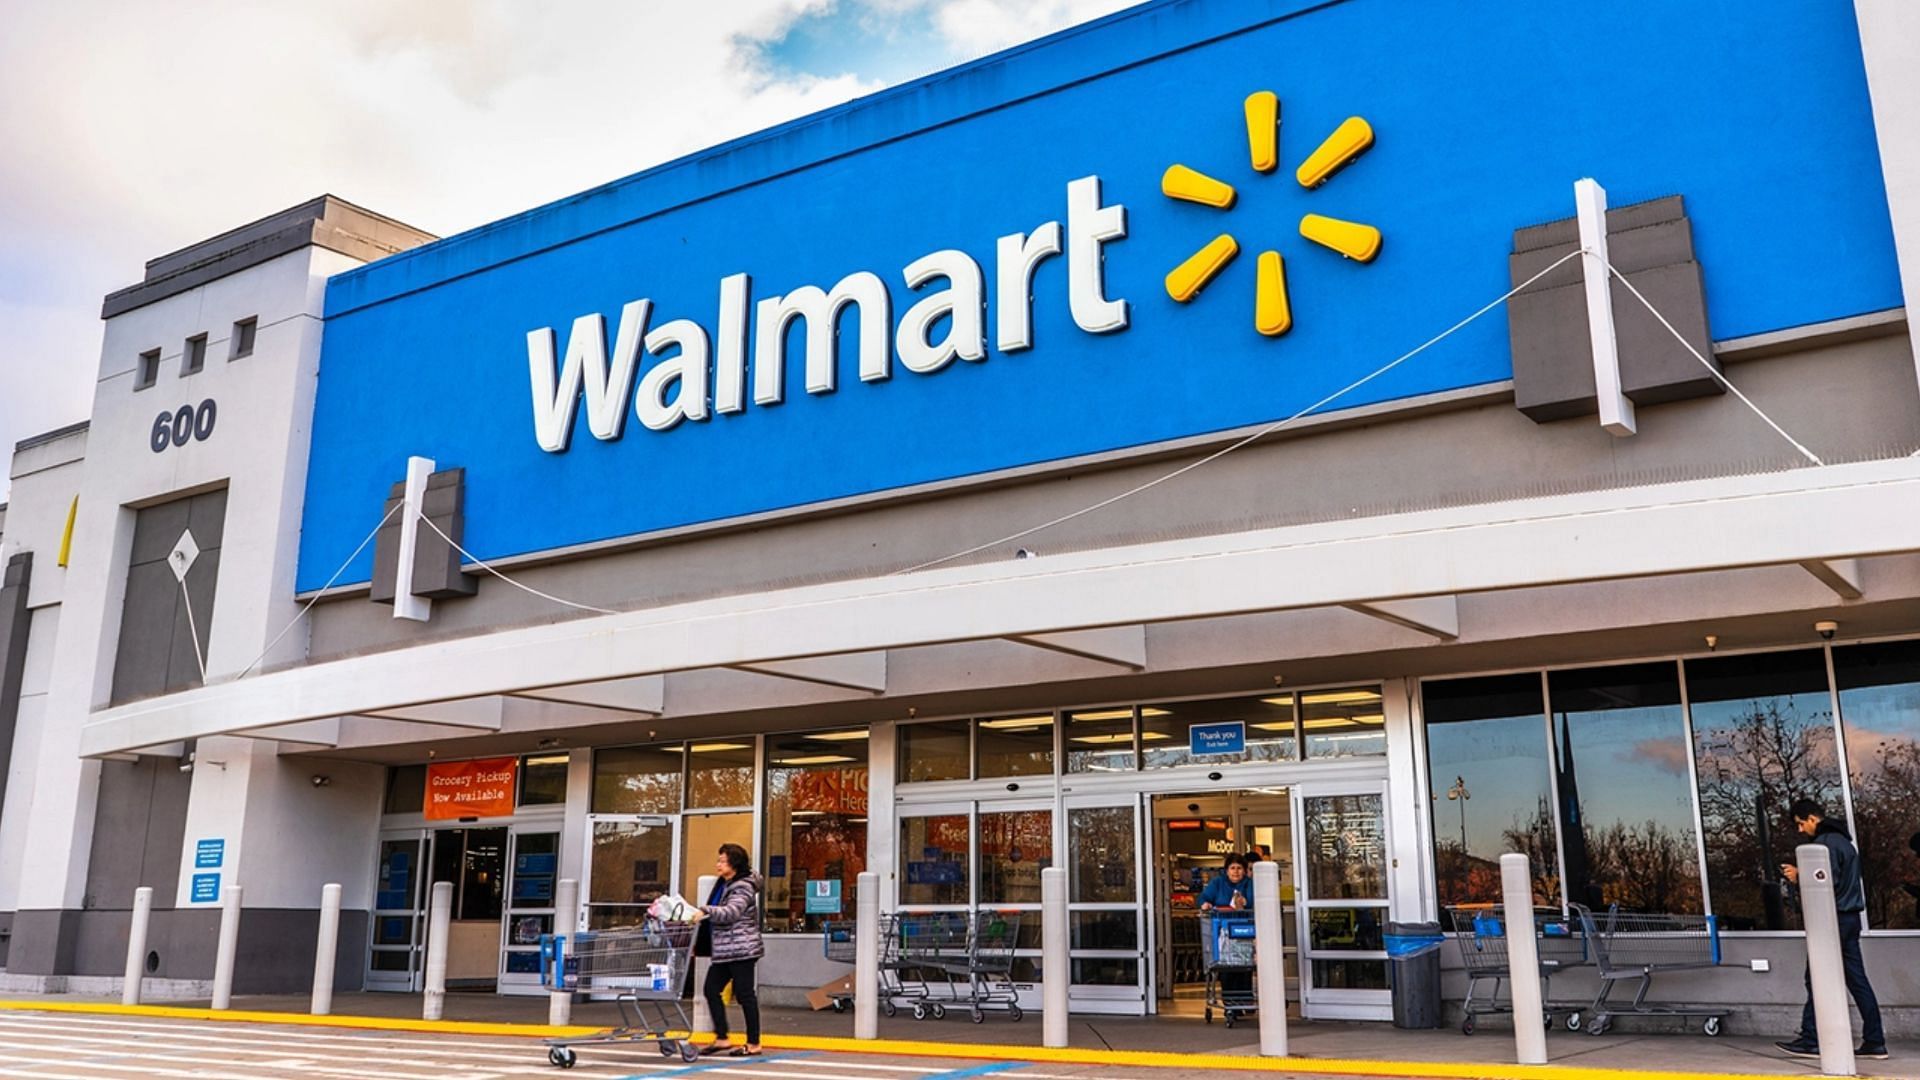 The Illinois region still has over 184 Walmart stores (Image via Bloomberg/Getty Images)